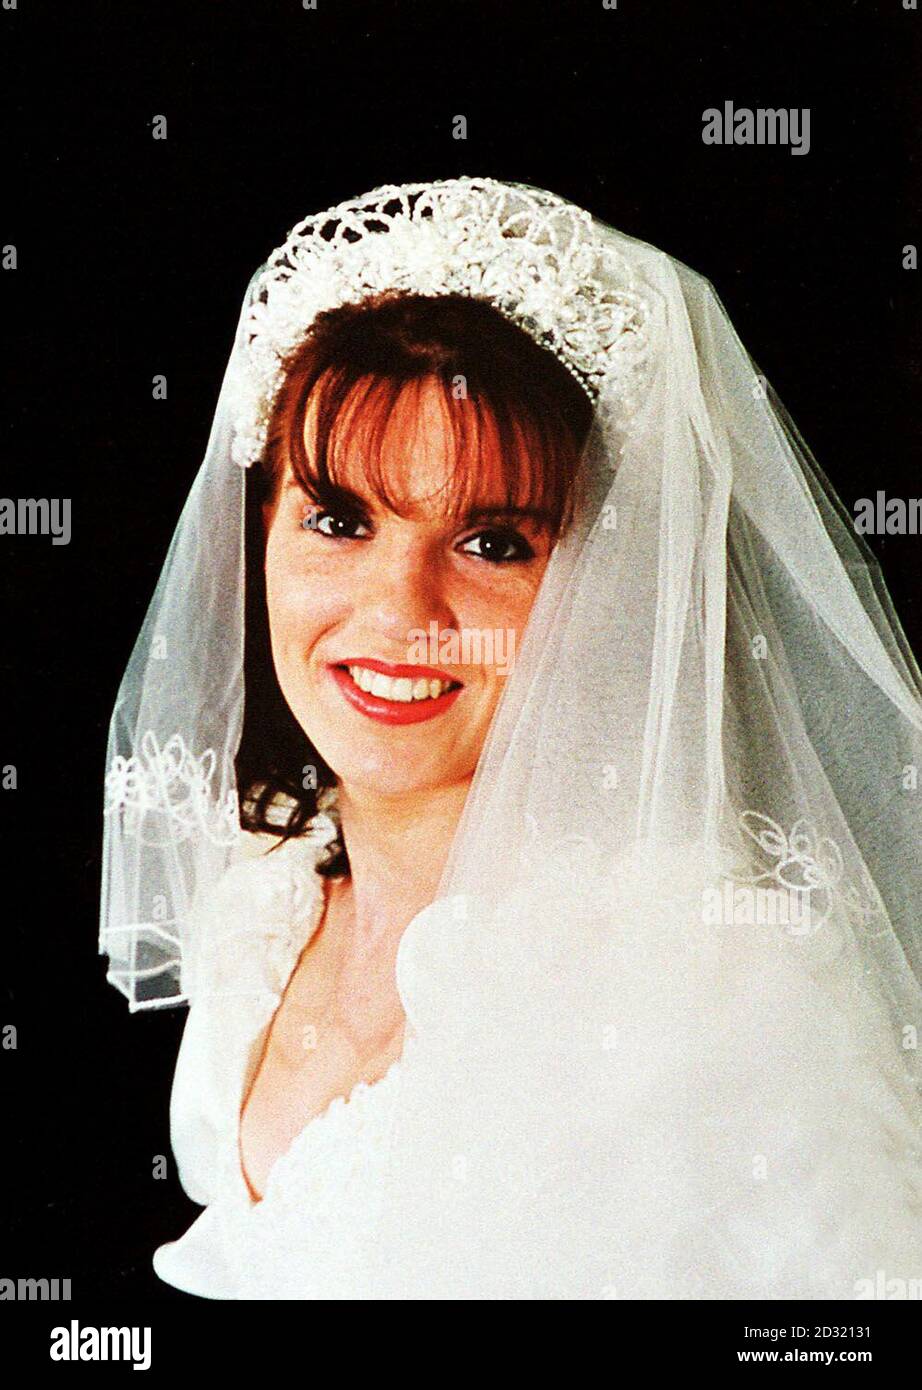 Collect picture of Beverley Payne a mother-of-two, from Neath, South Wales, pictured wearing a wedding dress as a modelling assignment. Ms Payne who was stabbed to death at her home. * .., beleive a man found in a silver Mercedes car, submerged in the city's Prince of Wales dock was associated with the young mother who was murdered, police said. Twenty detectives are now working on the murder enquiry from an incident room at Port Talbot police station. Police want to speak to anybody who may have seen his R-registered silver Mercedes in the docks area from 6.45am. *15/07/2001...Chris Davie Stock Photo